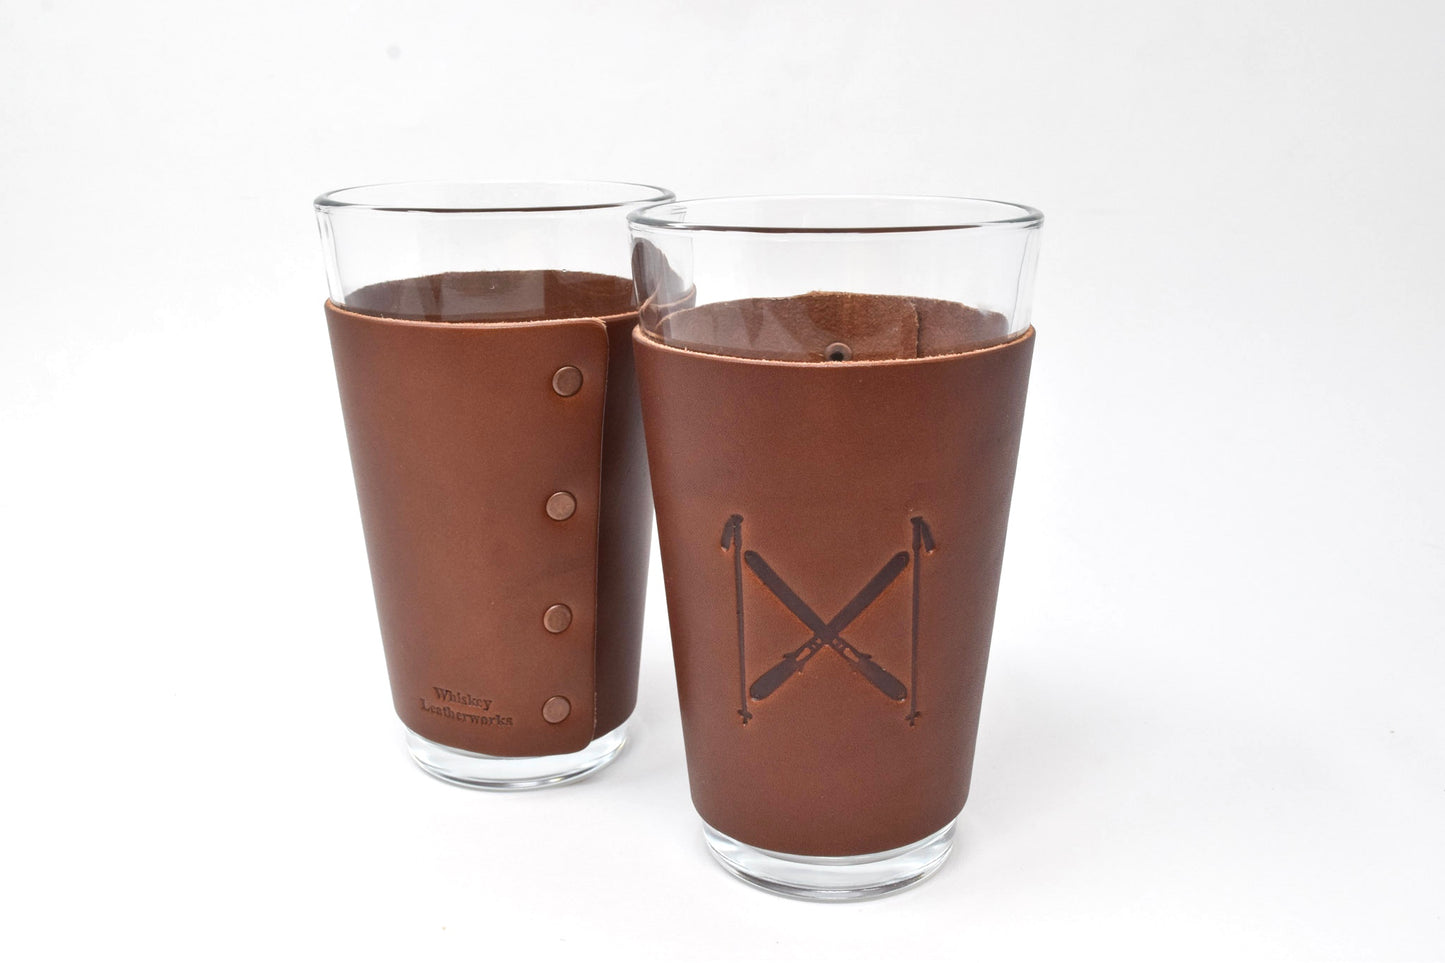 The Patina'd Pints: Set of Two